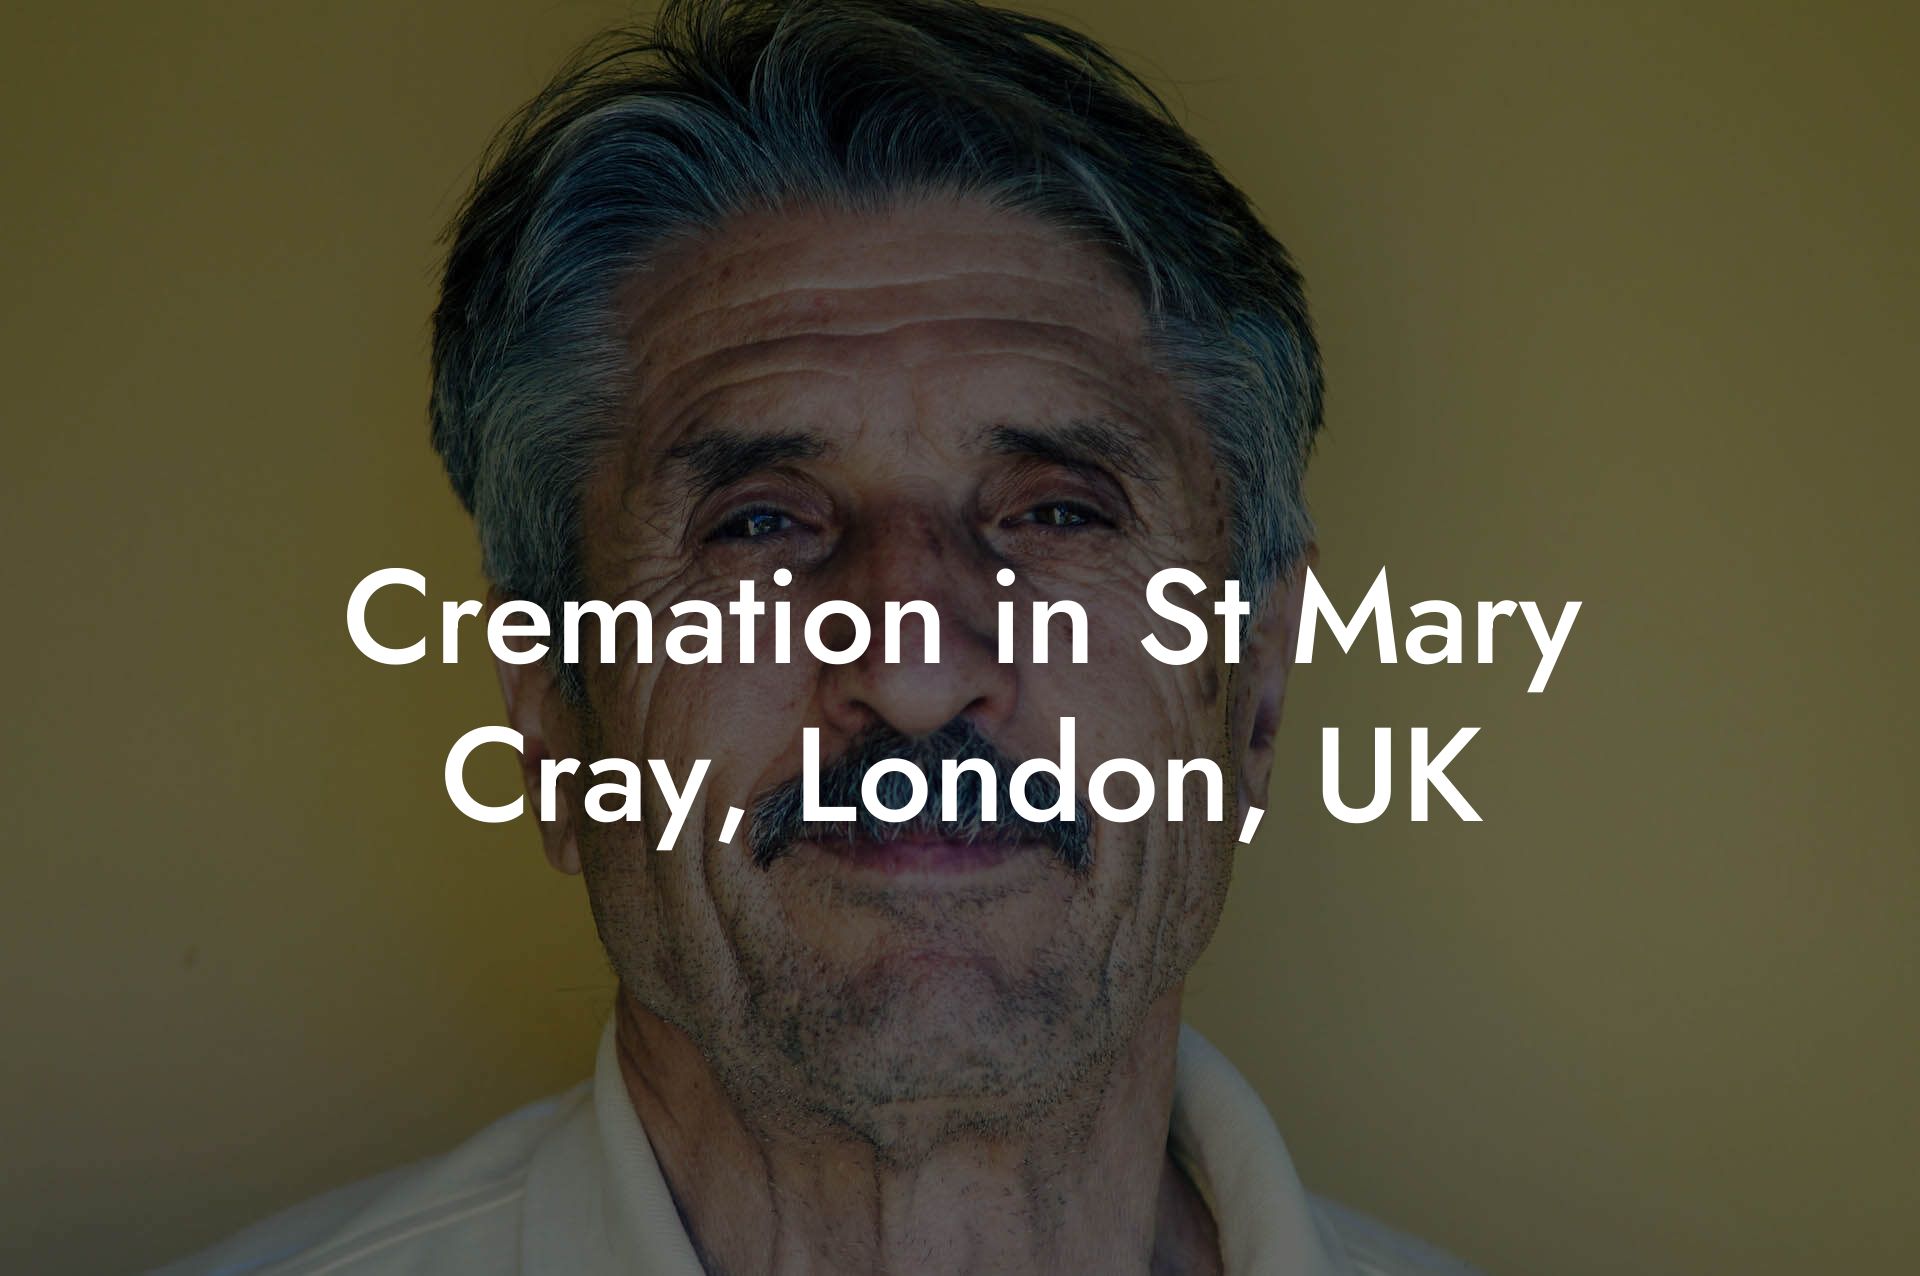 Cremation in St Mary Cray, London, UK